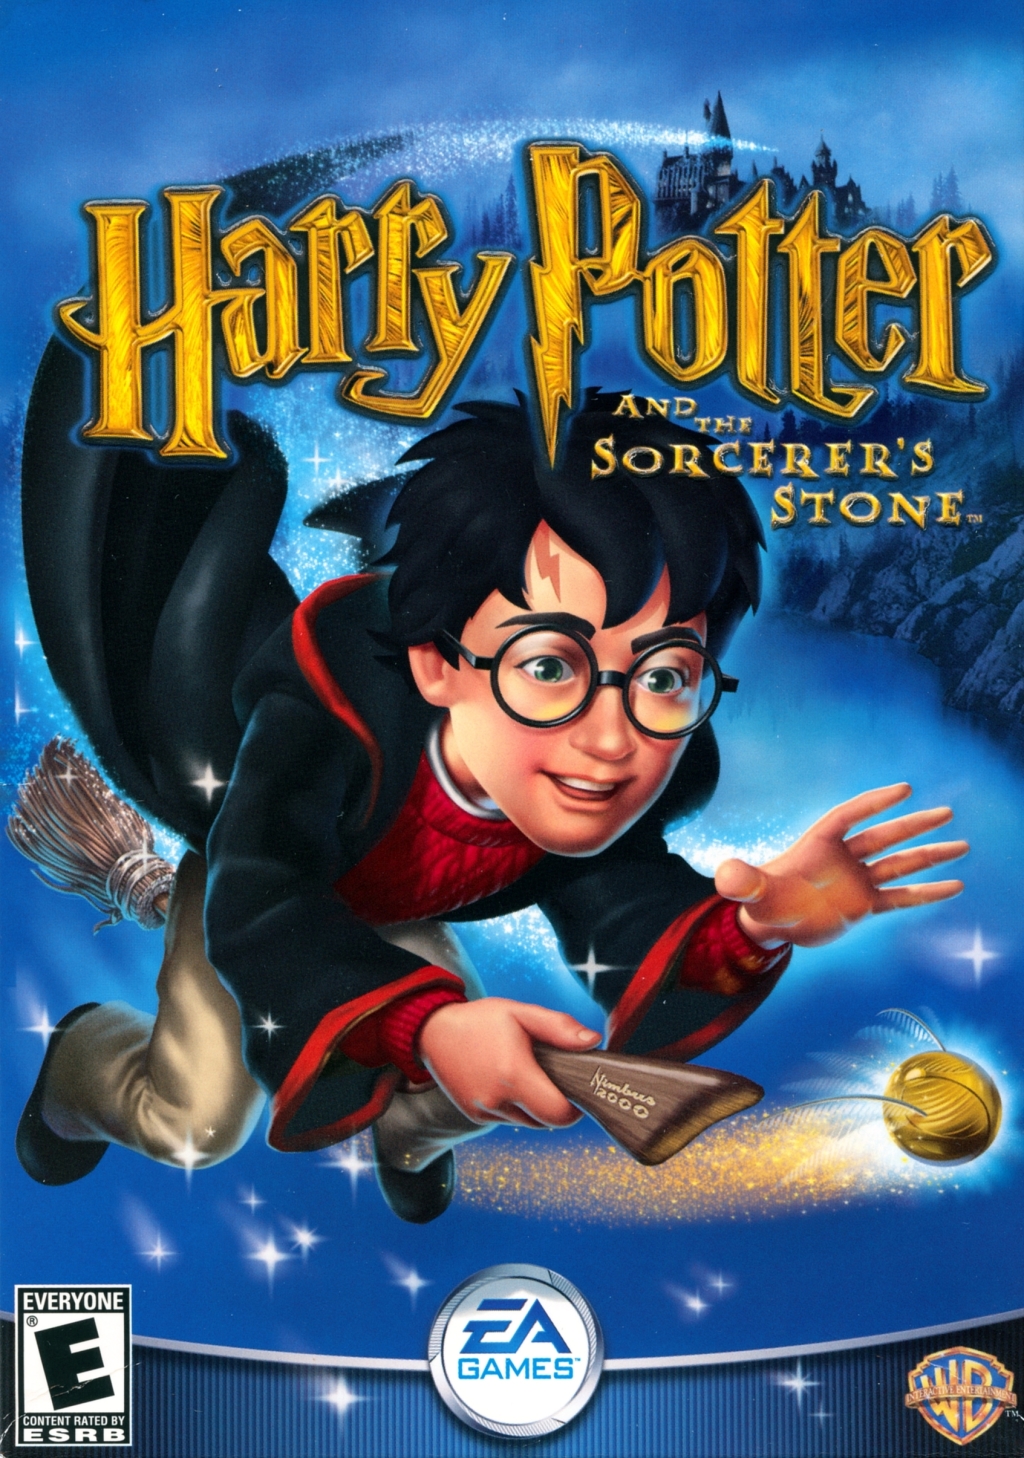 download harry potter and the philosophers stone for mac free